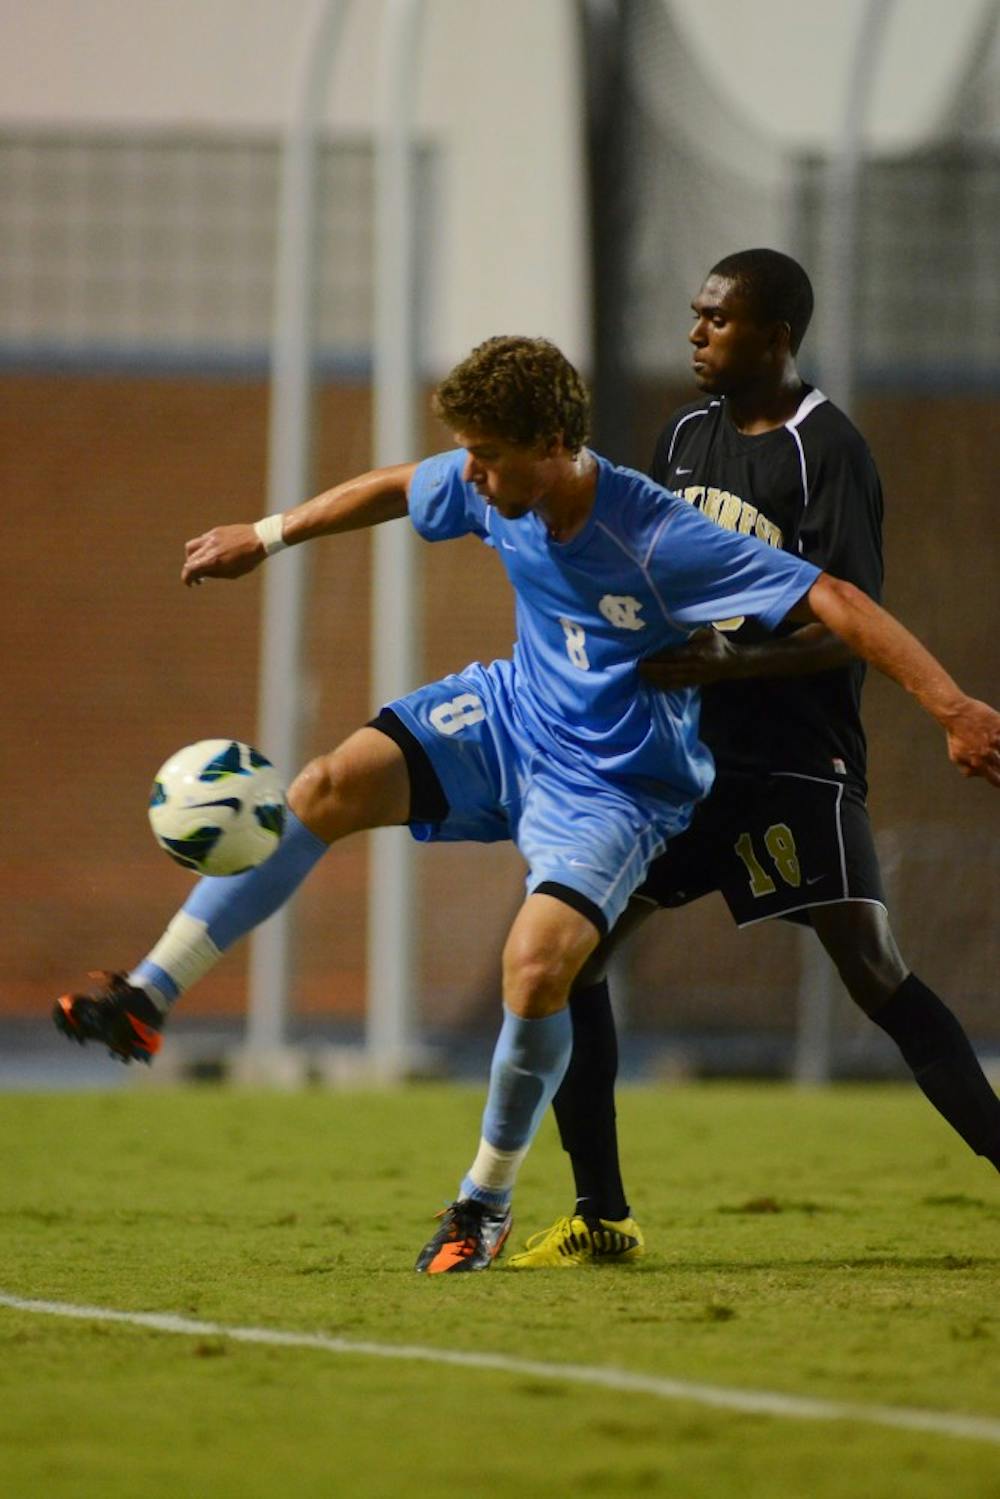 UNC Senior Martin Murphy (8) traps the ball along the sideline against Wake Forest in Carolina's 0-0 draw on September 14th, 2012 at Fetzer Field in Chapel Hill, North Carolina.